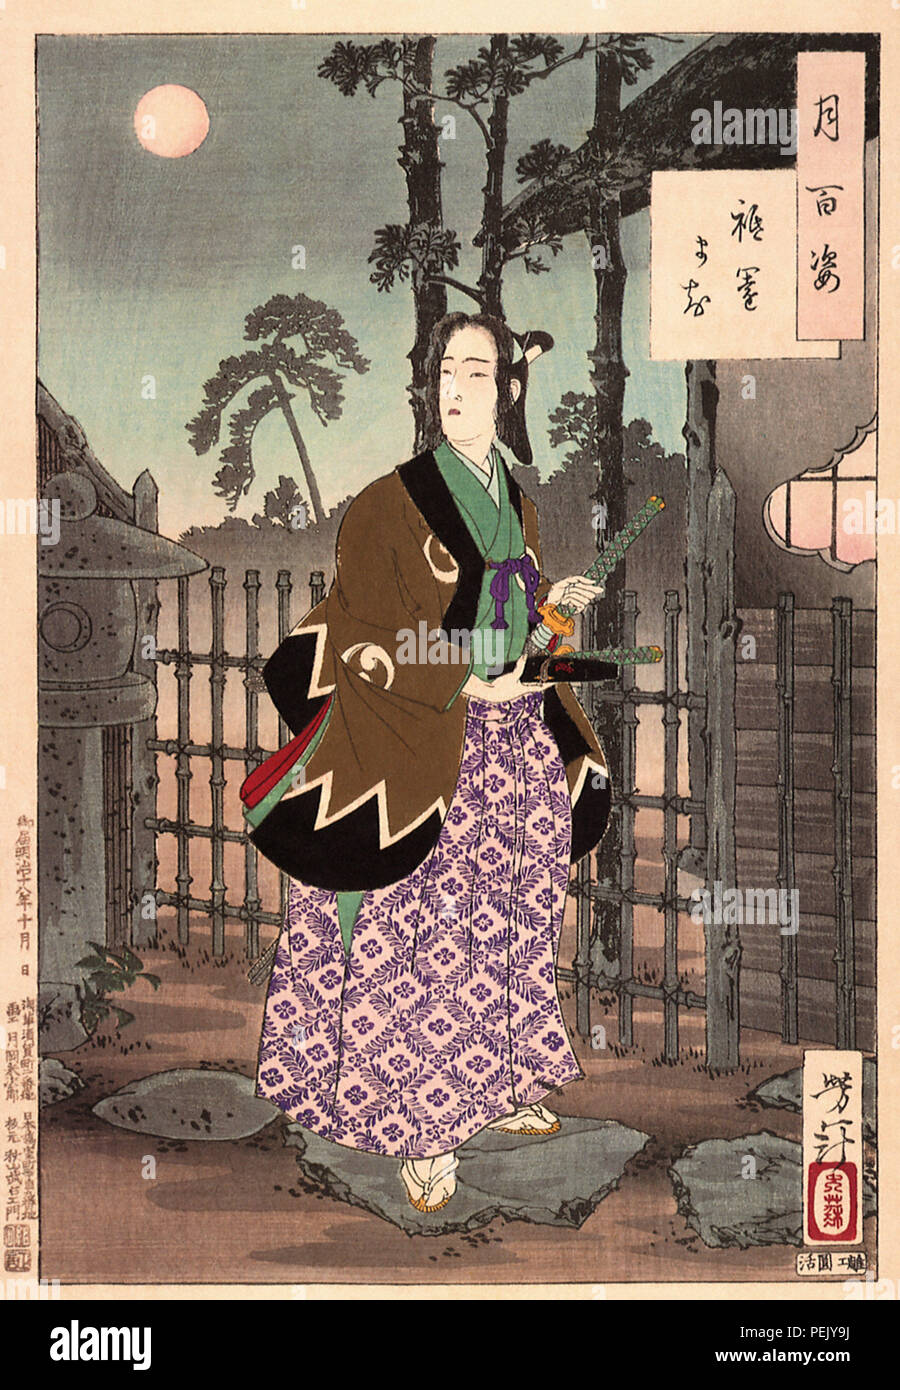 The Gion District, Unknown artist. Stock Photo